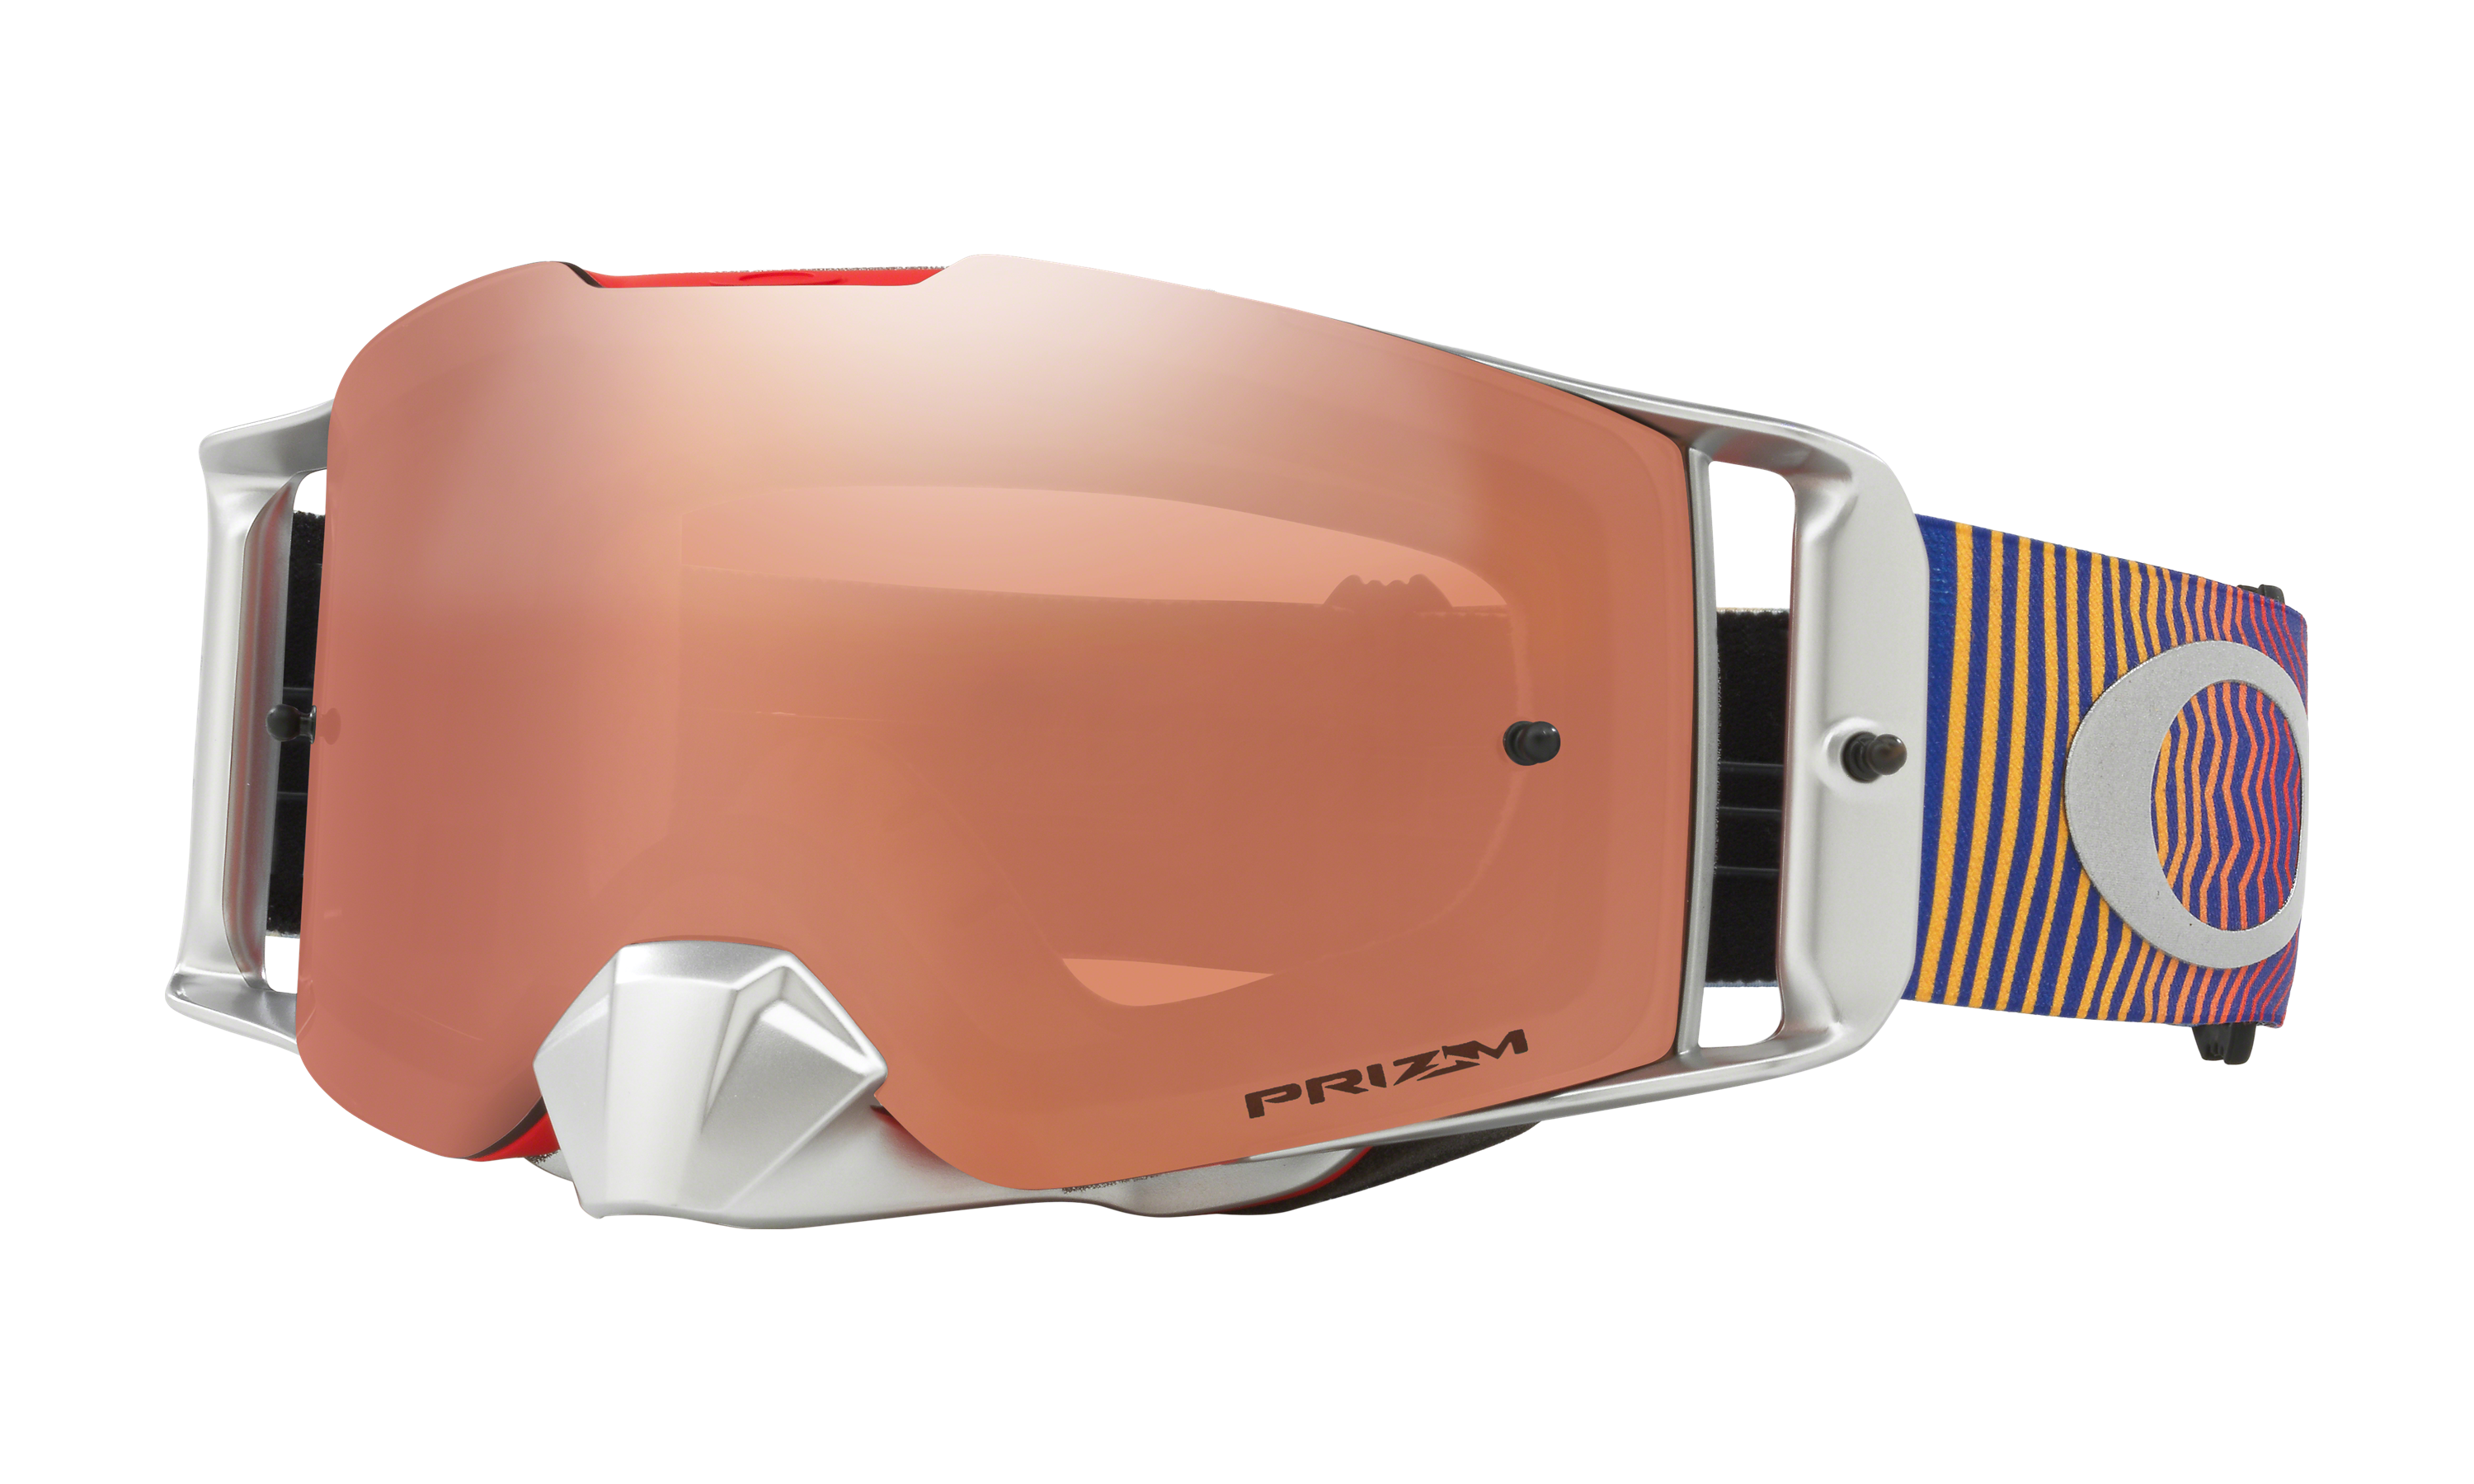 oakley frontline mx goggles with prizm lens